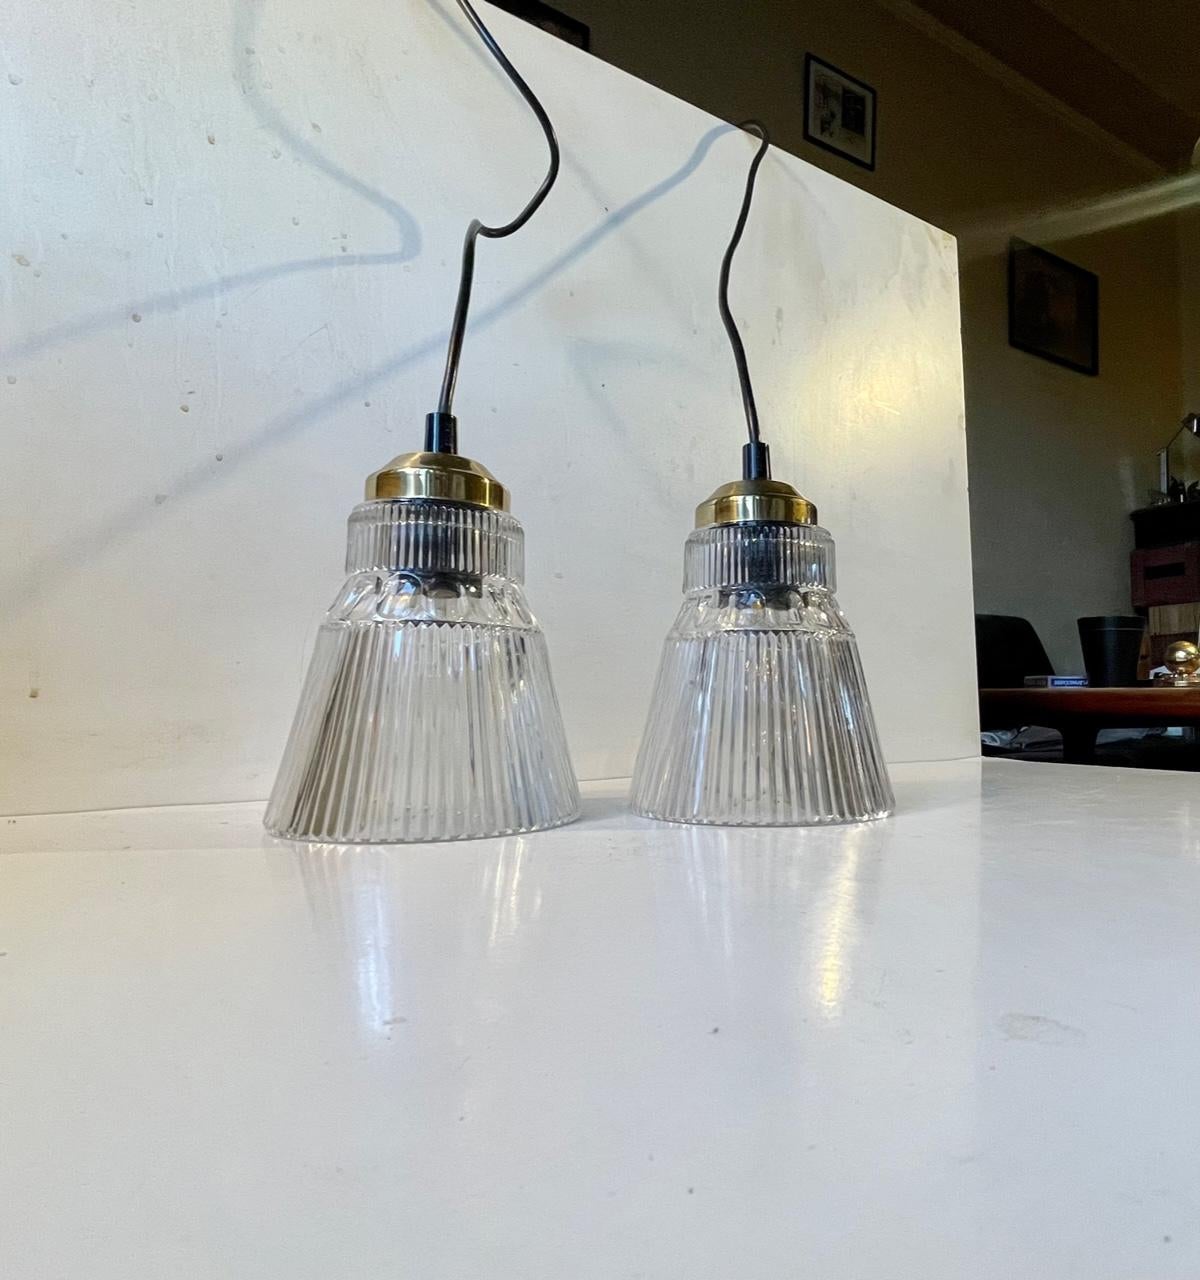 Stylish pendant lamps that resembles some of Hans Agne Jakobsson´s designs. Made from pressed partially fluted grey-tinted glass and set in brass tops. Made by an unknown Scandinavian maker circa 1980-90. Fitted with E27 socket, light bulbs, 2